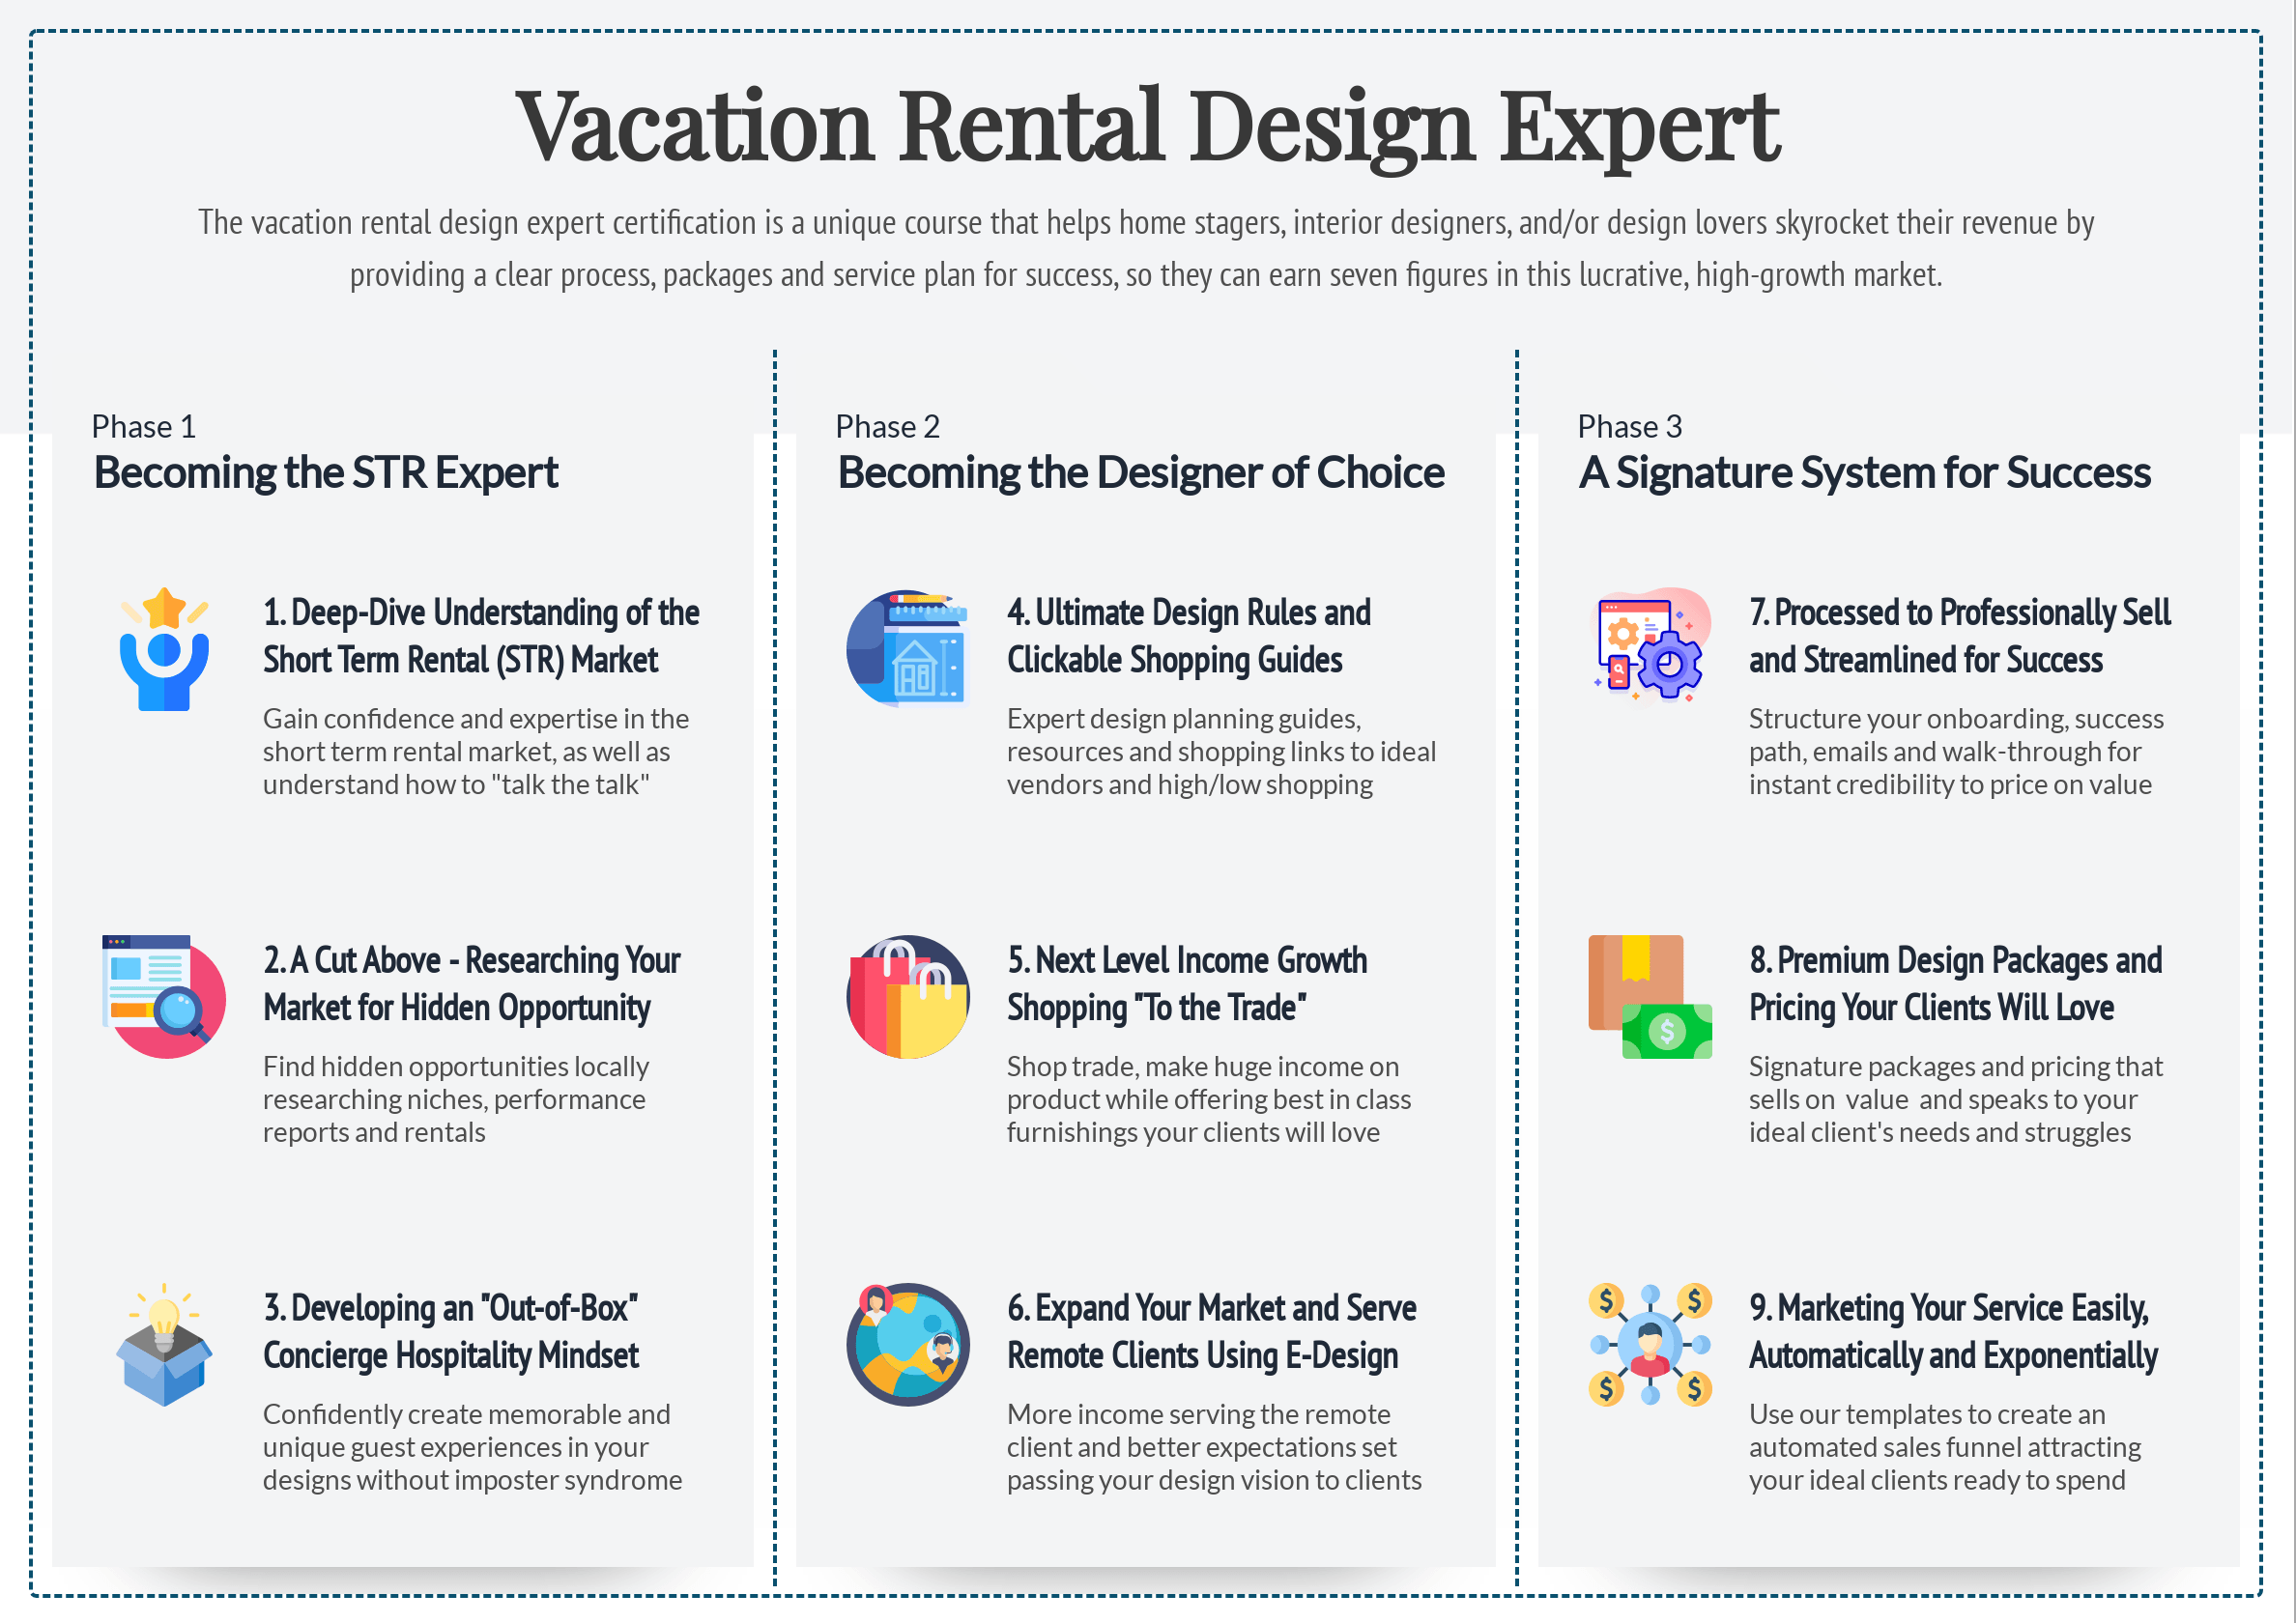 Vacation Rental Design Expert Course Path